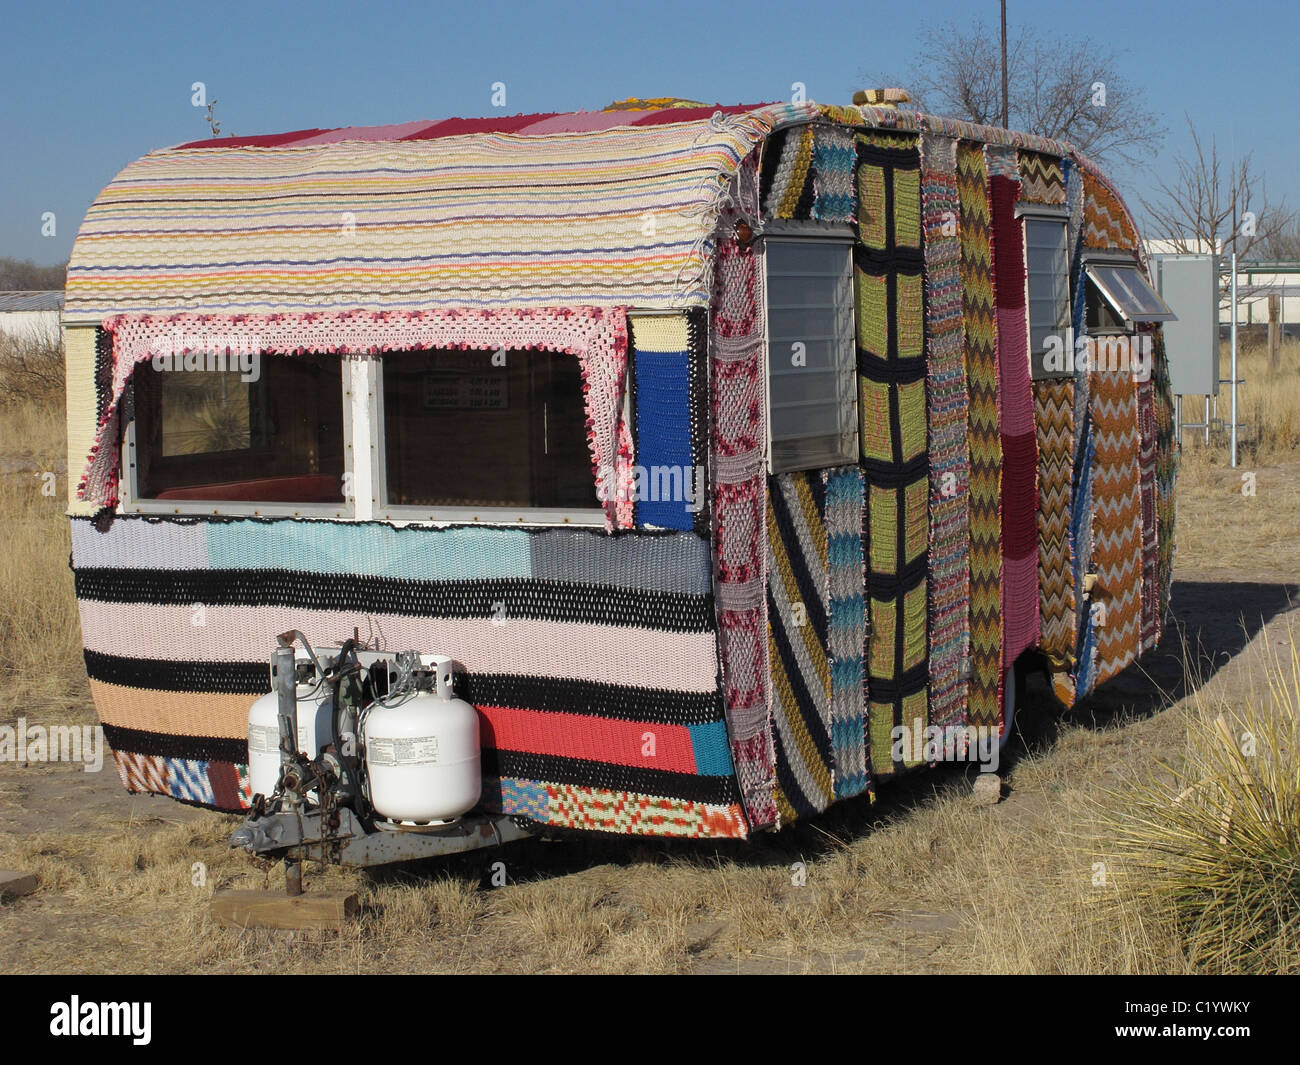 Vintage Camper trailer covered in knitting by Magda Sayeg of Knitta Please. The trailer is in Marfa, Texas at El Cosmico. Stock Photo